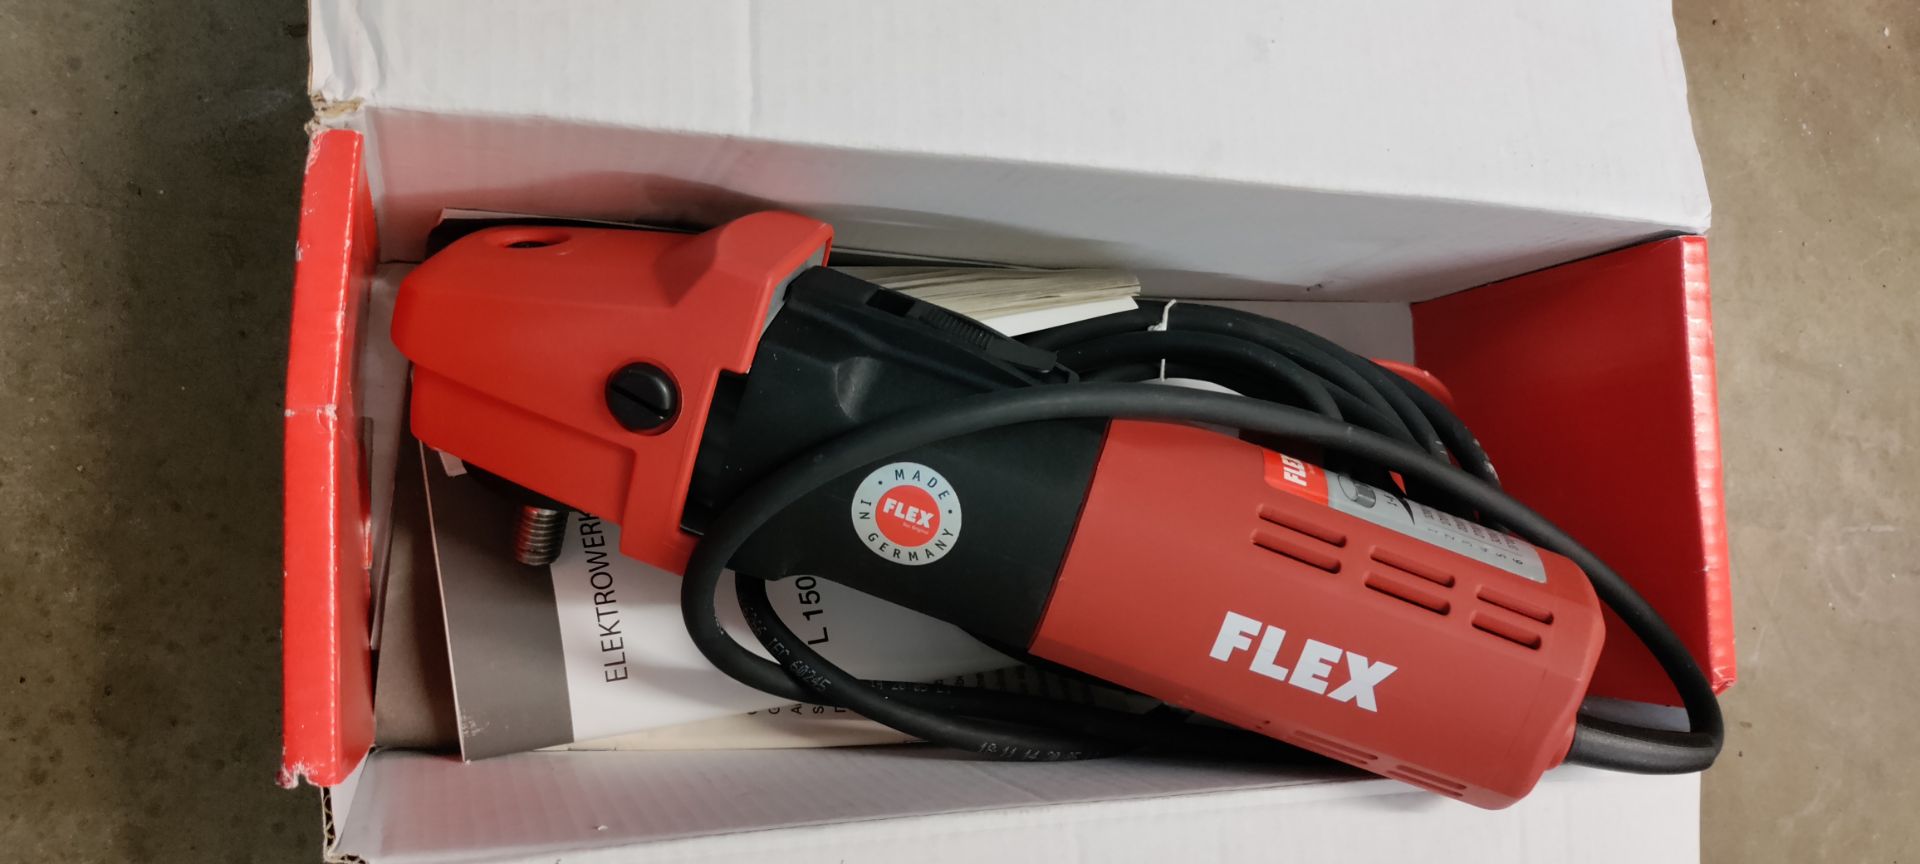 *Flex L1503VR 240v Polisher (new & boxed) (Location: 64 King Edward St, Grimsby, DN31 3JP, Viewing - Image 2 of 3